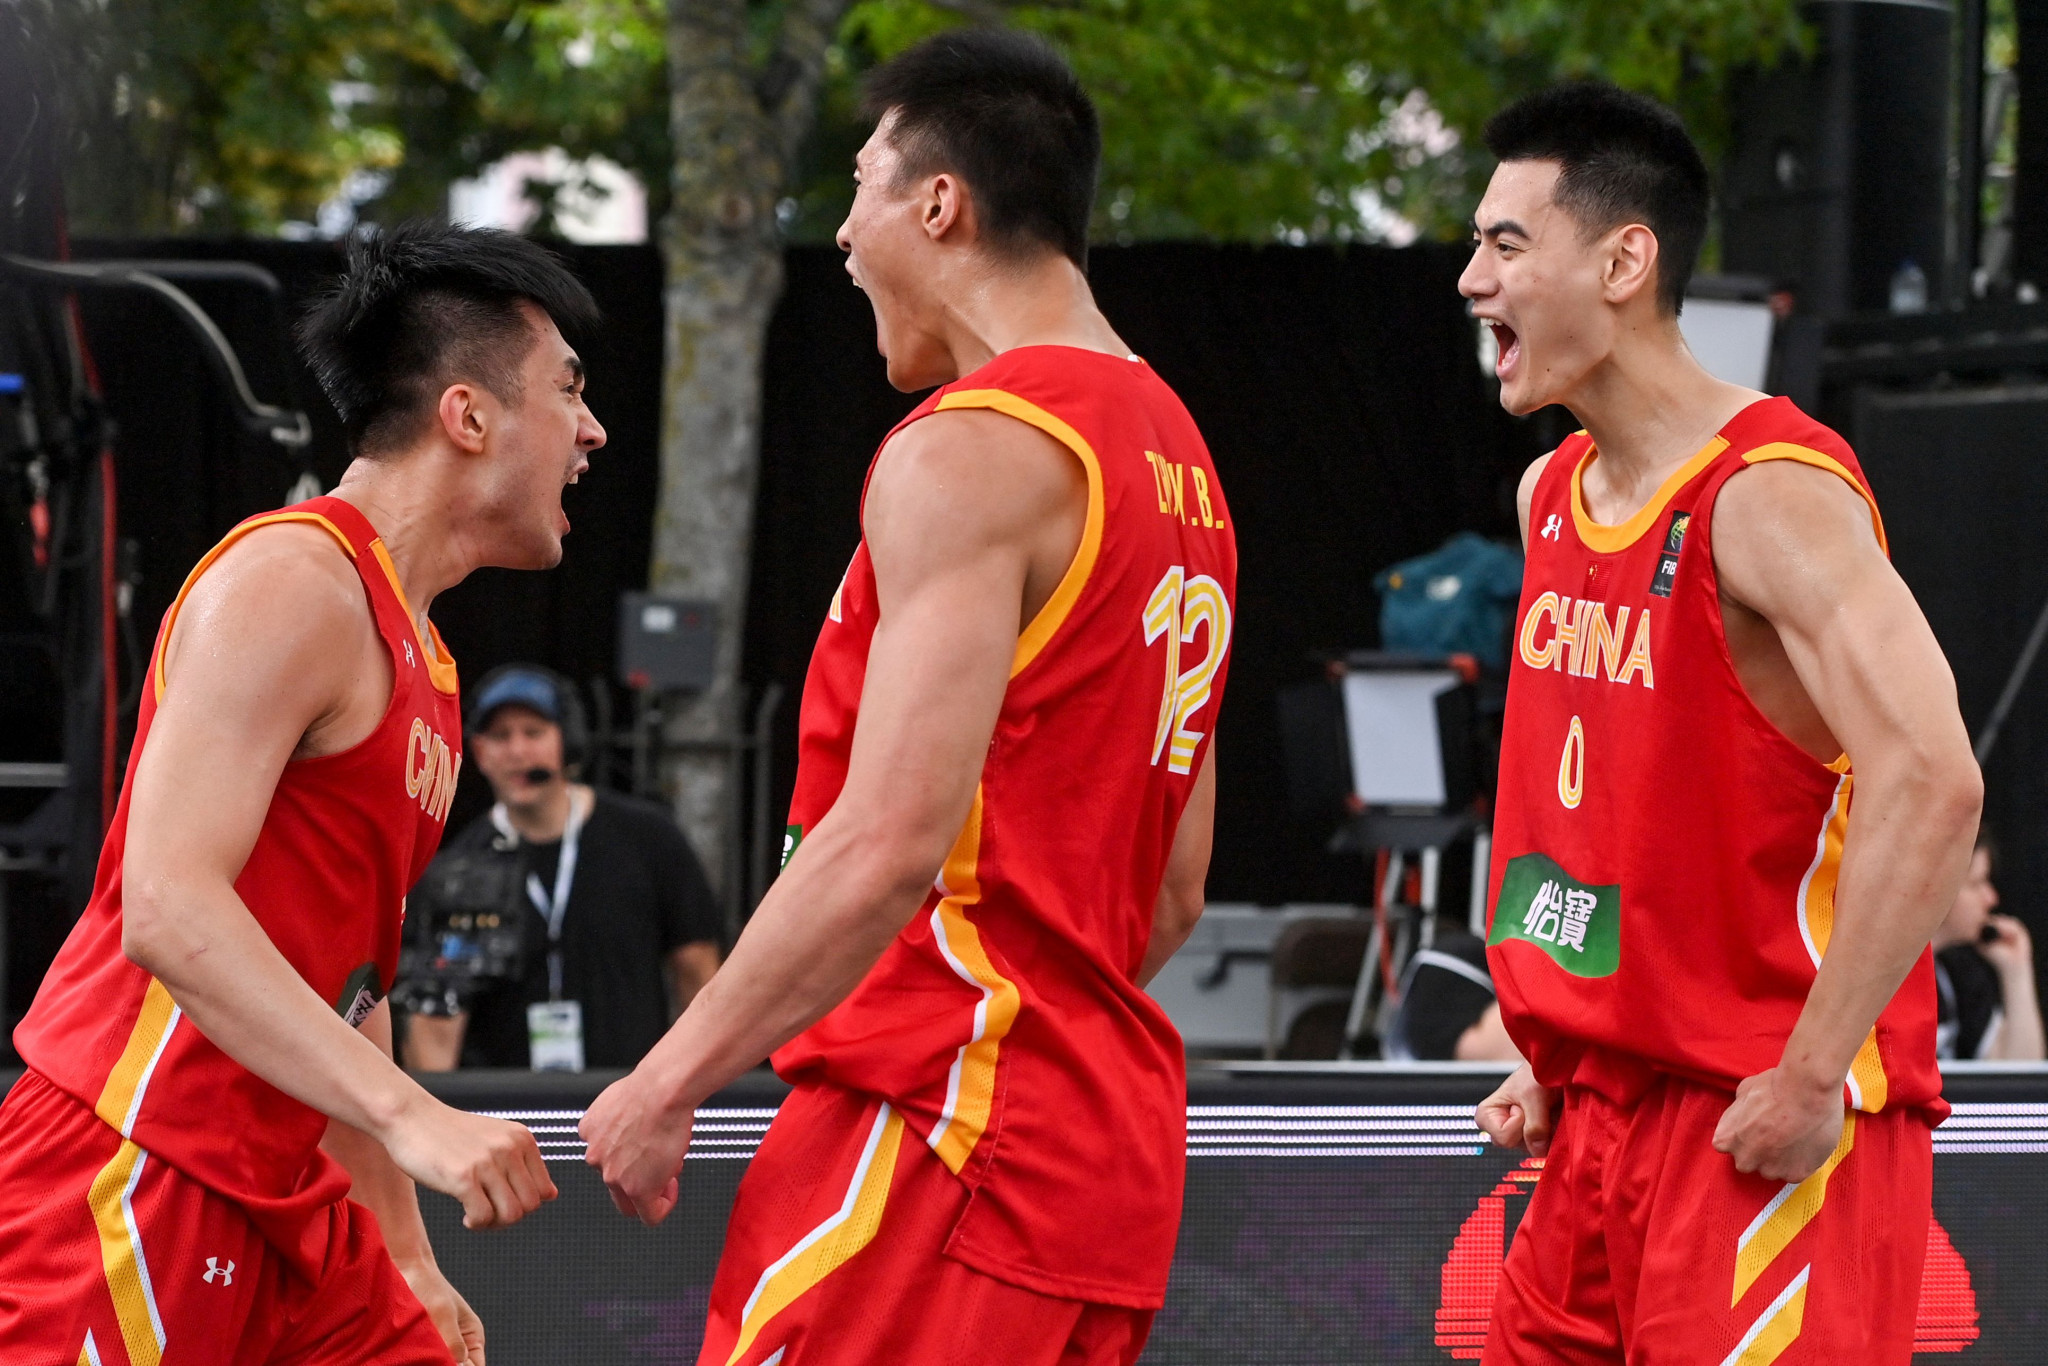 The Chinese 3x3 basketball team did not request to use CREPS IDF after training there earlier this year ©Getty Images